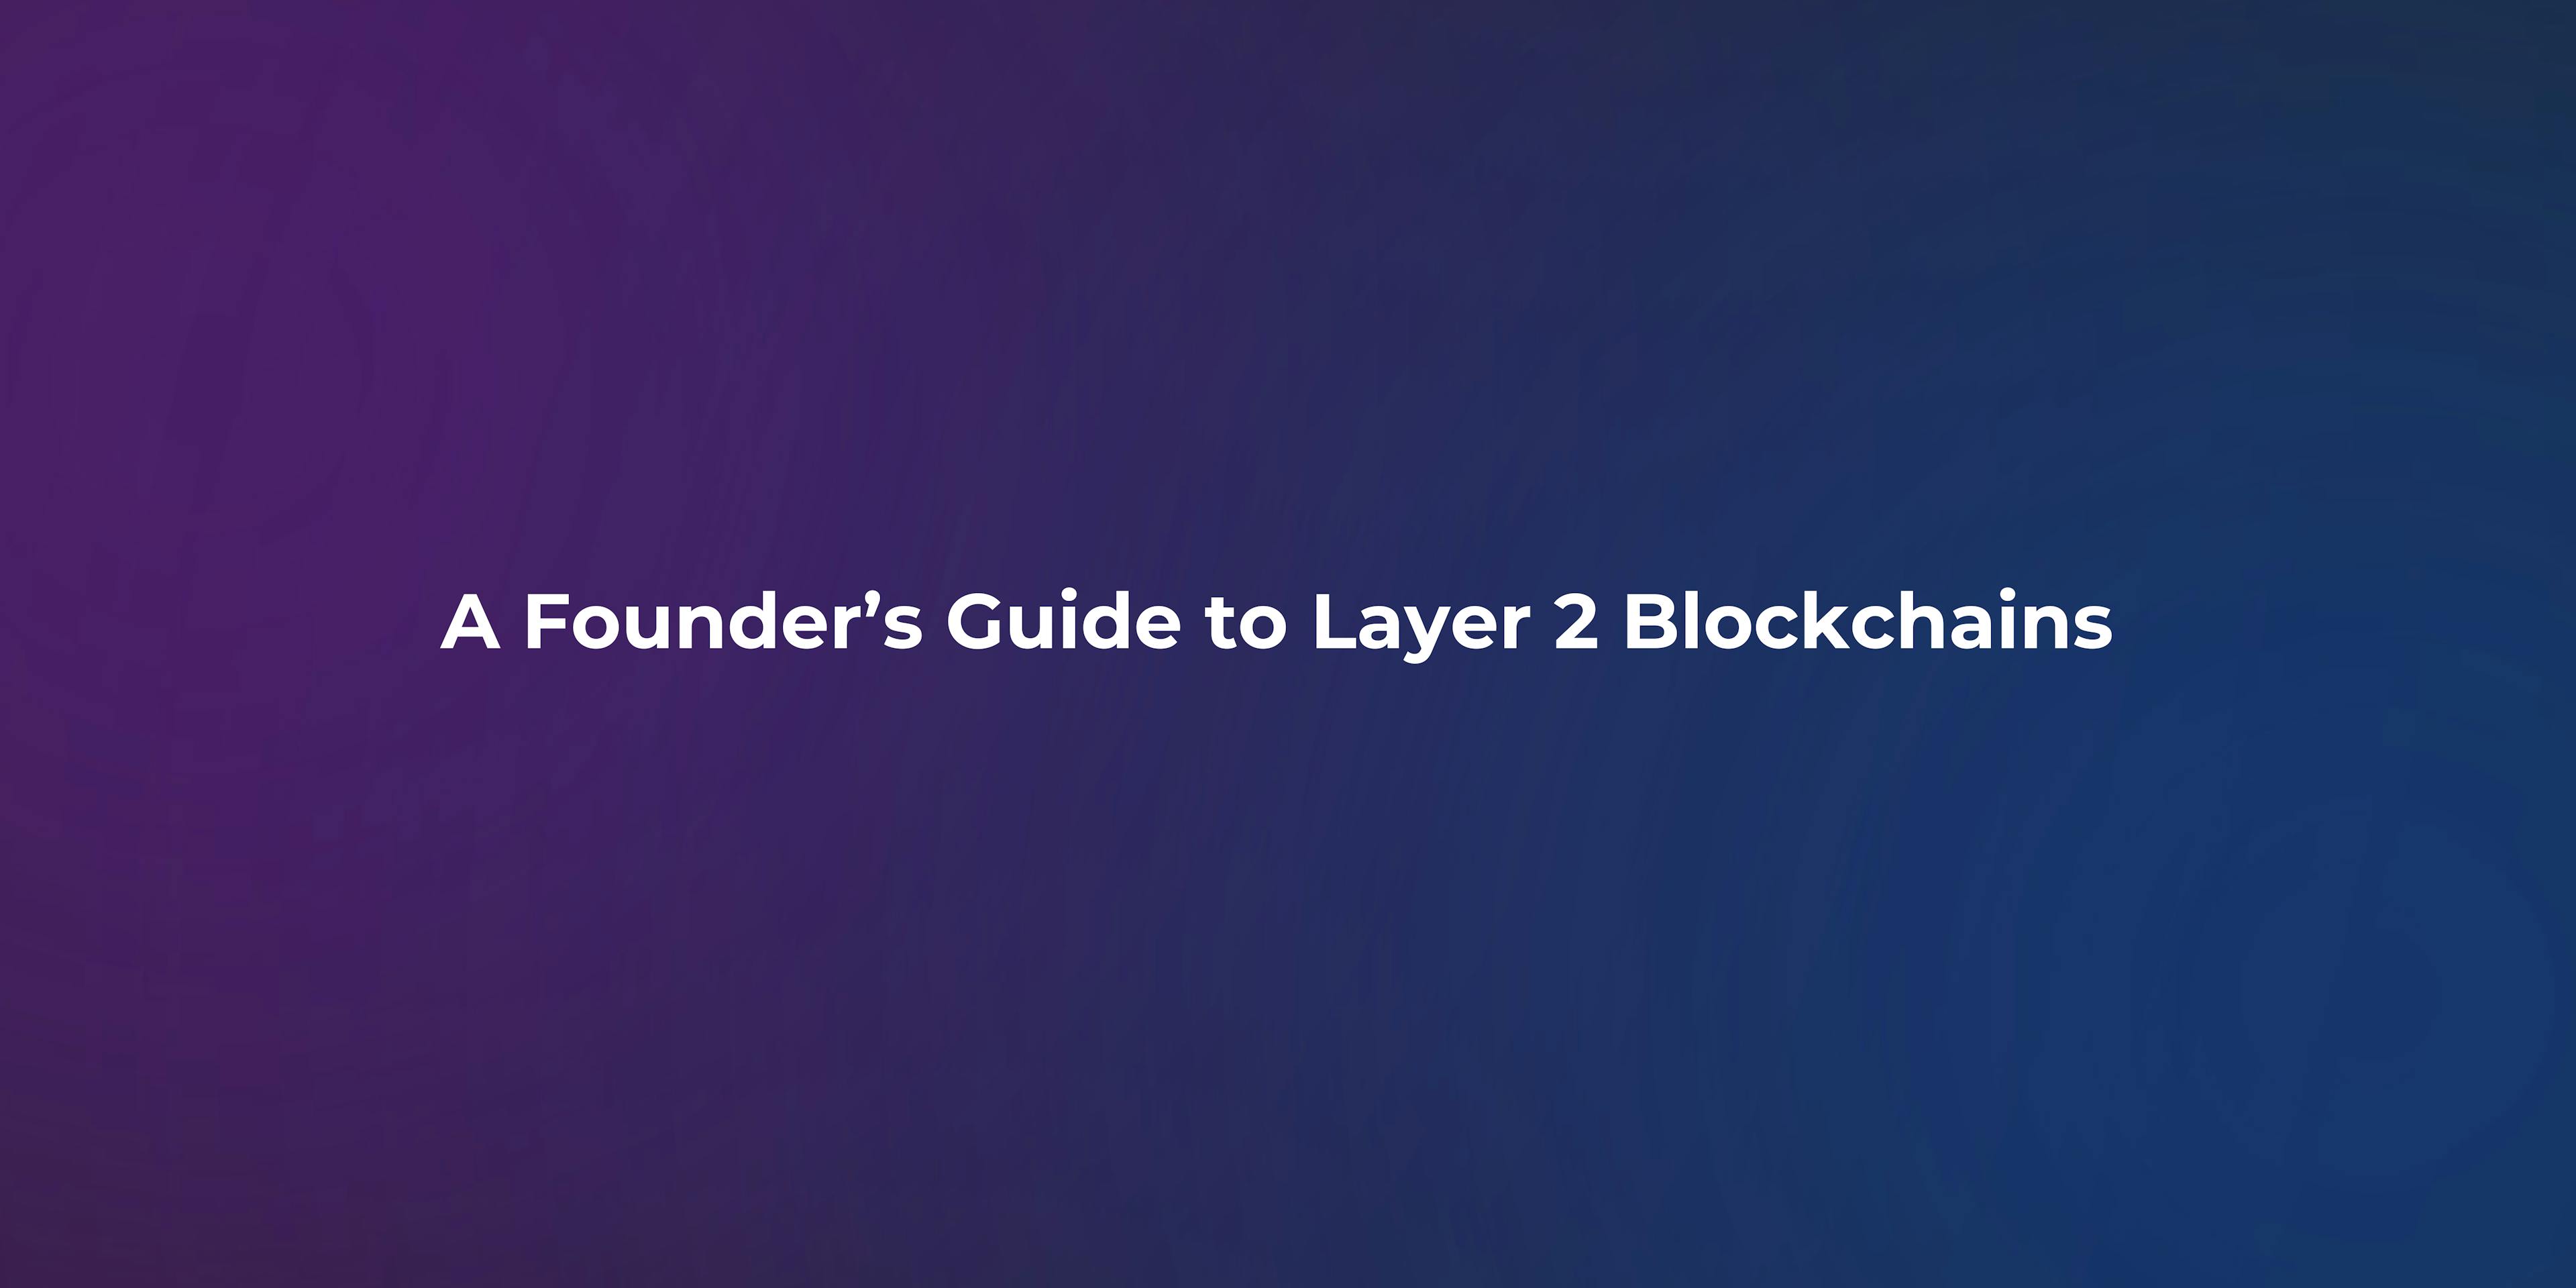 featured image - A Founder’s Guide to Layer 2 Blockchains before starting your next project